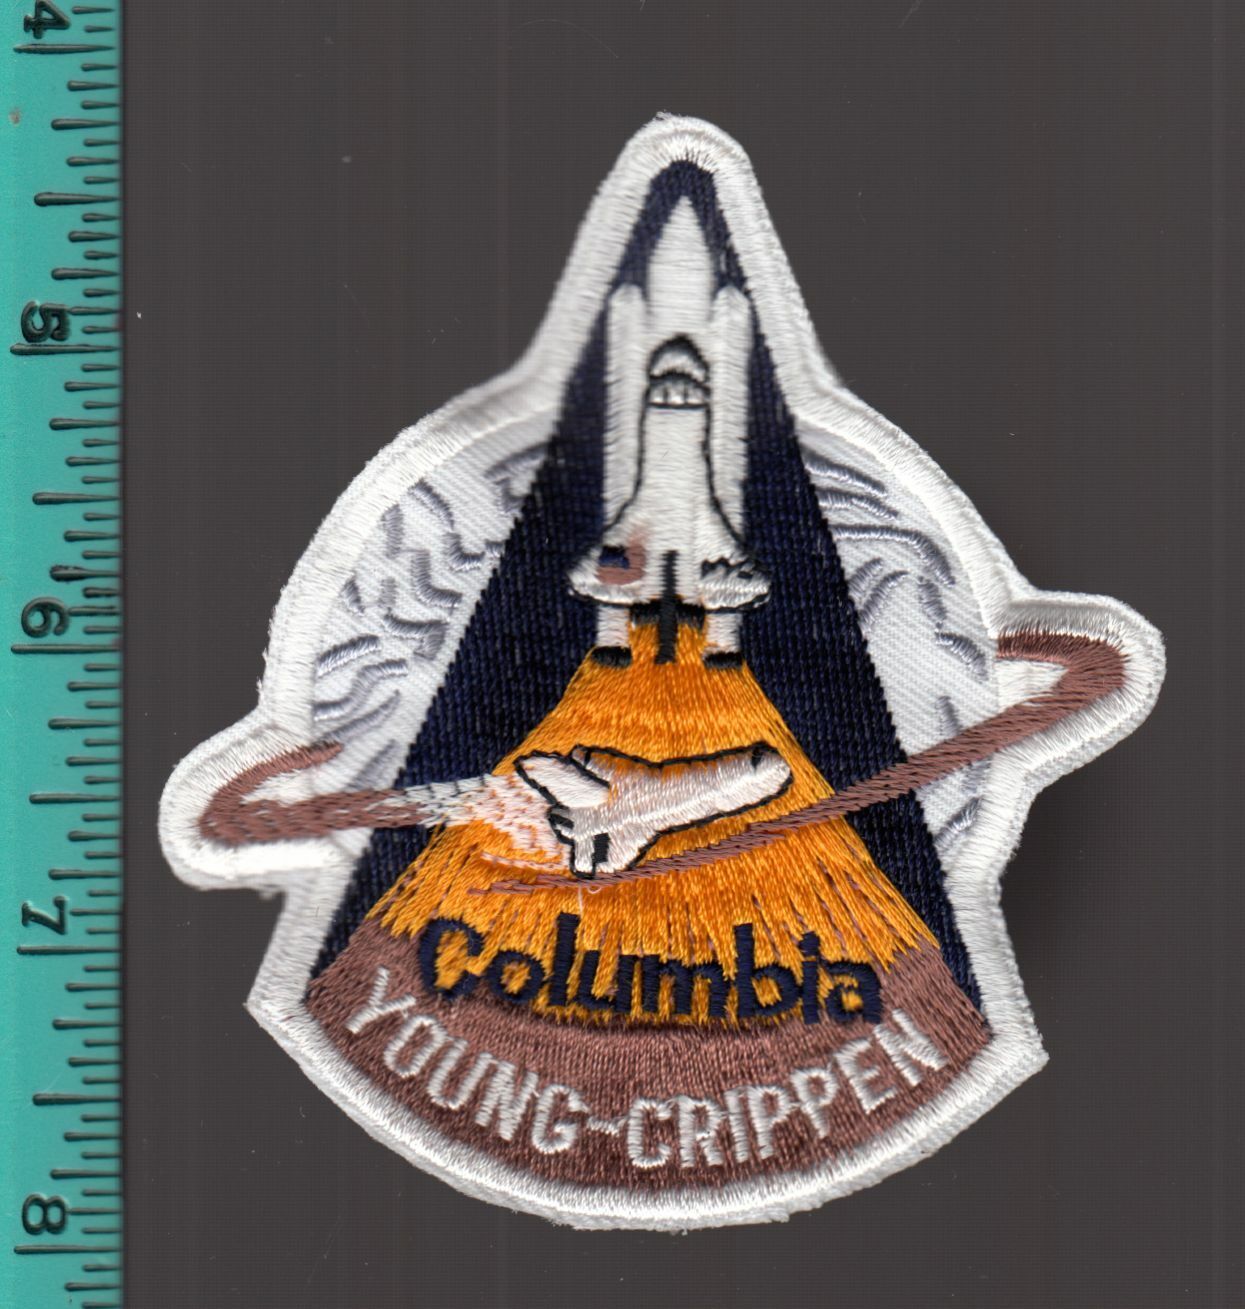 1981 Columbia STS-1 Space Shuttle embroidered patch Young & Crippen NASA (A4